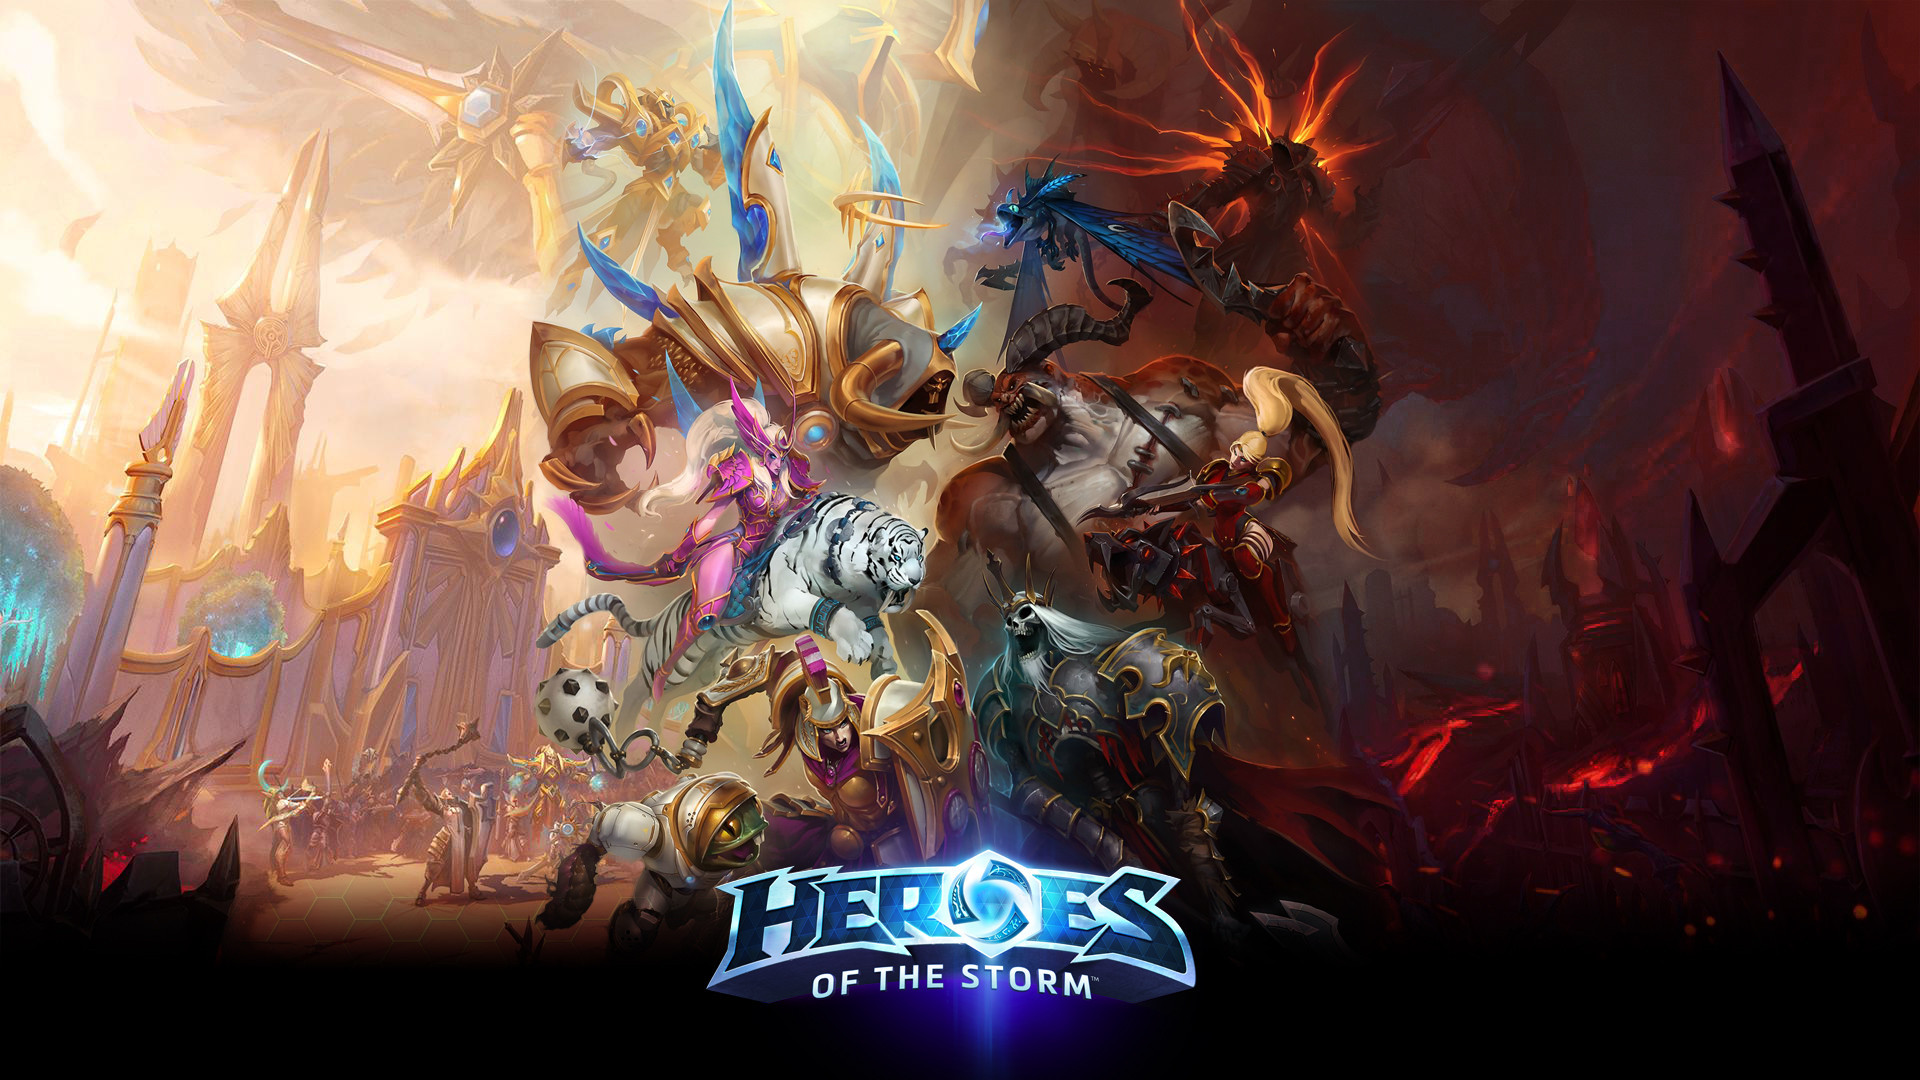 Heroes of the Storm Wallpapers (61+